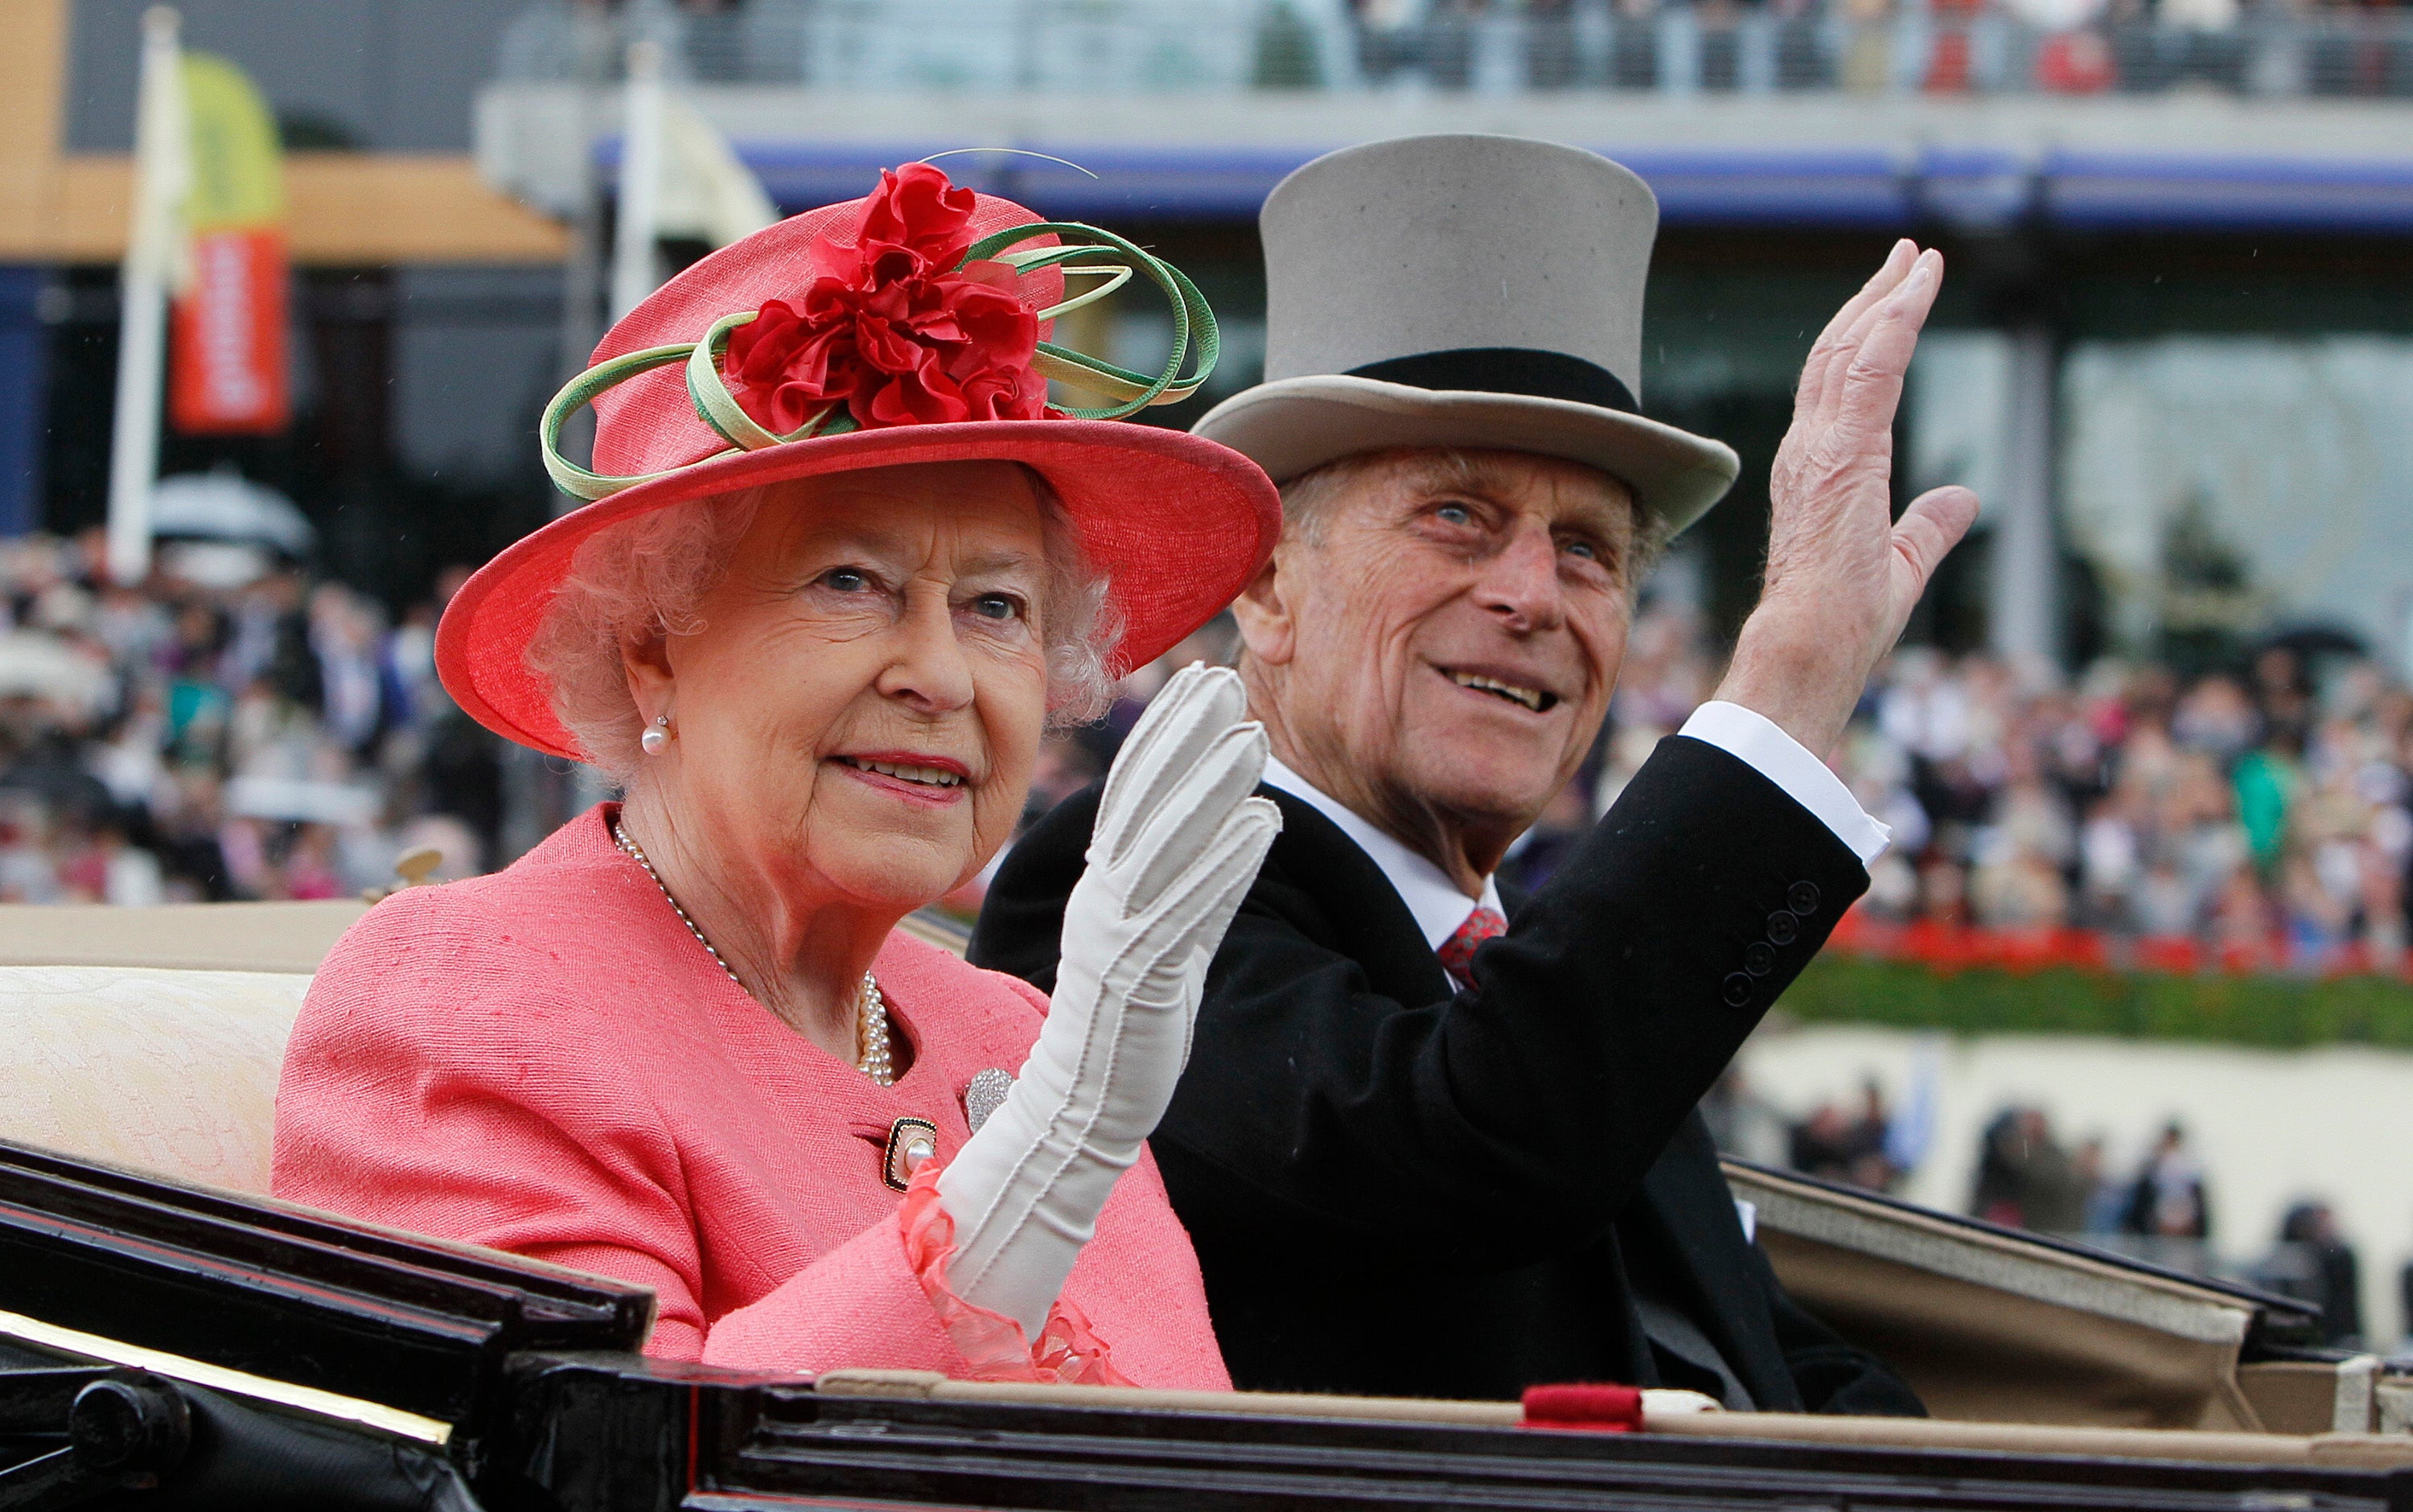 The Queen and Prince Philip together in 2011